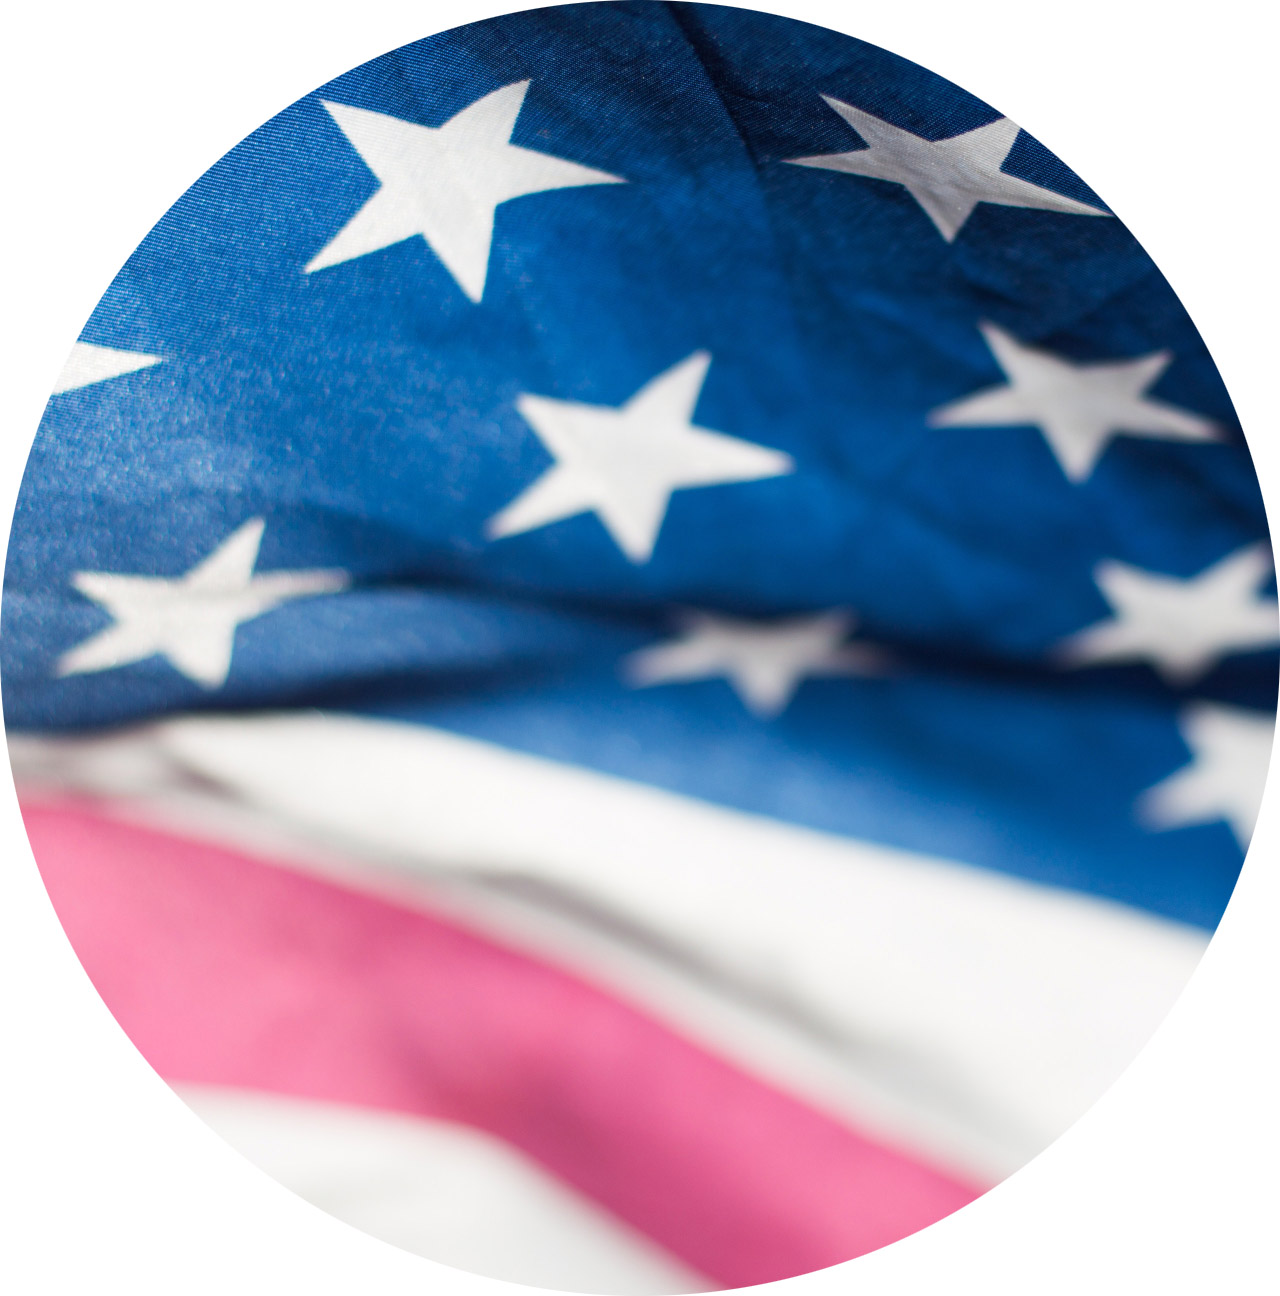 Etown Apartments provides a military discount to those who have served and are serving